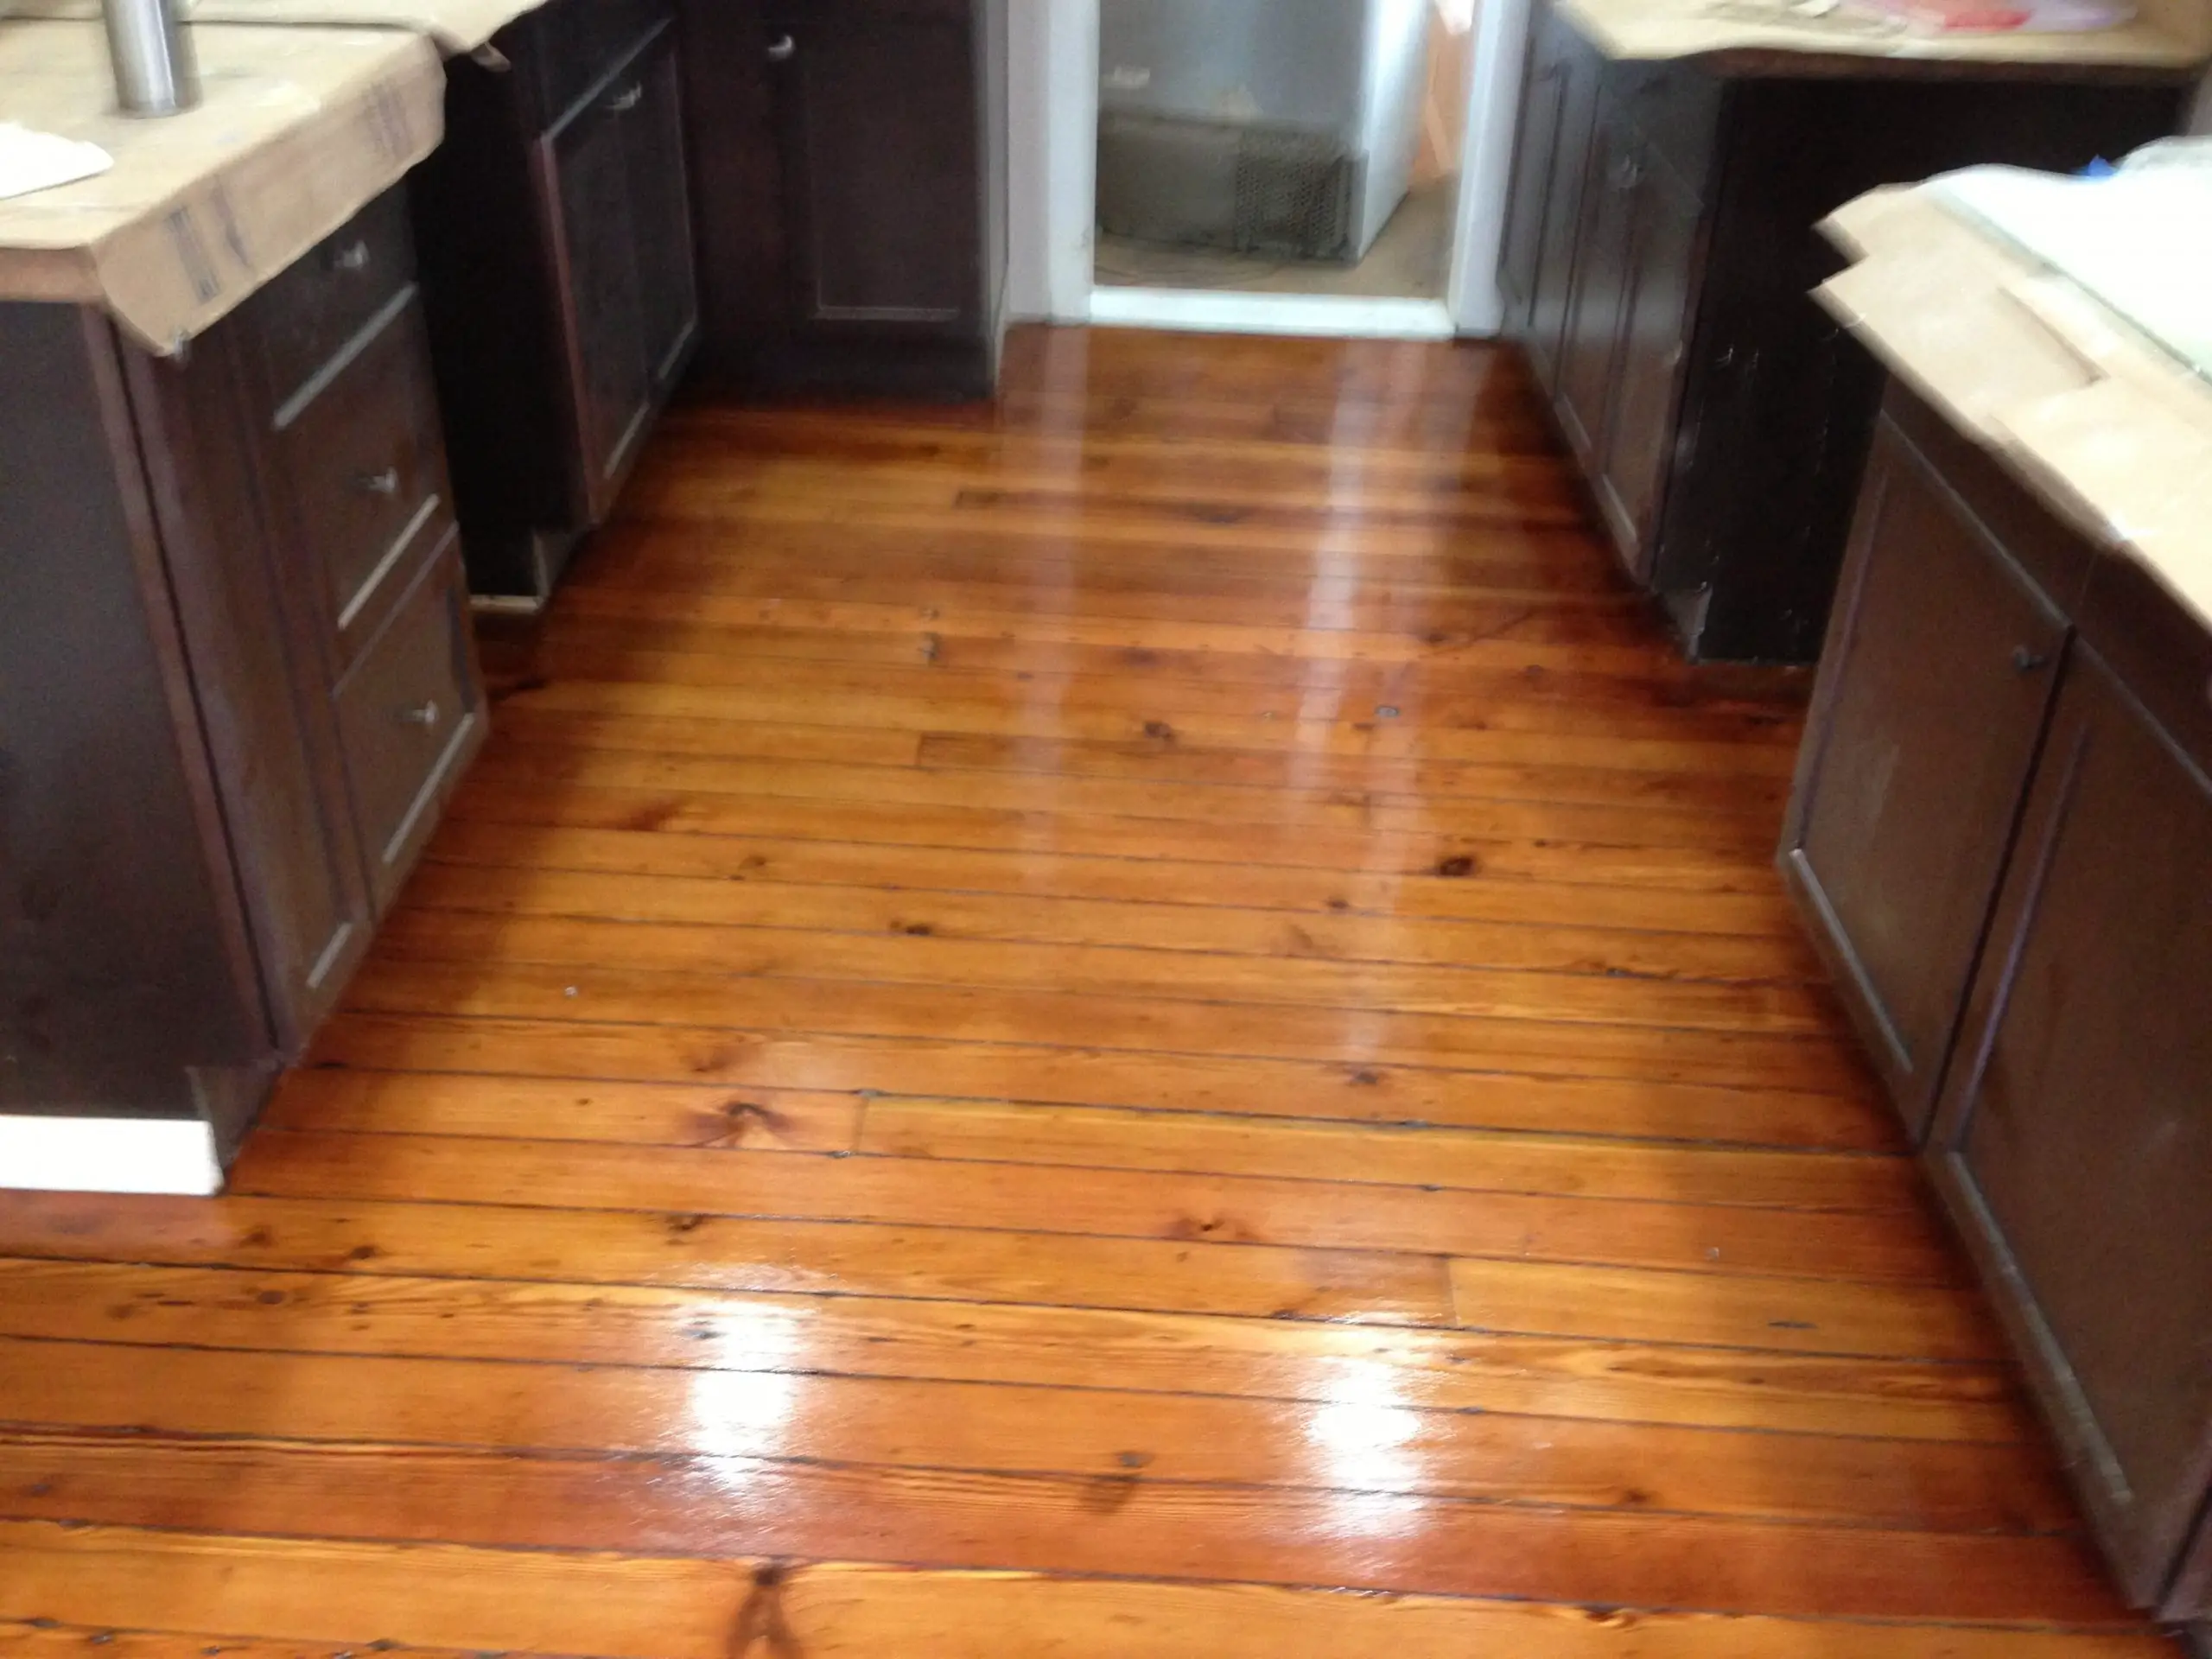 Can You Use Pine Sol On Laminate Floors : Multi Purpose ...